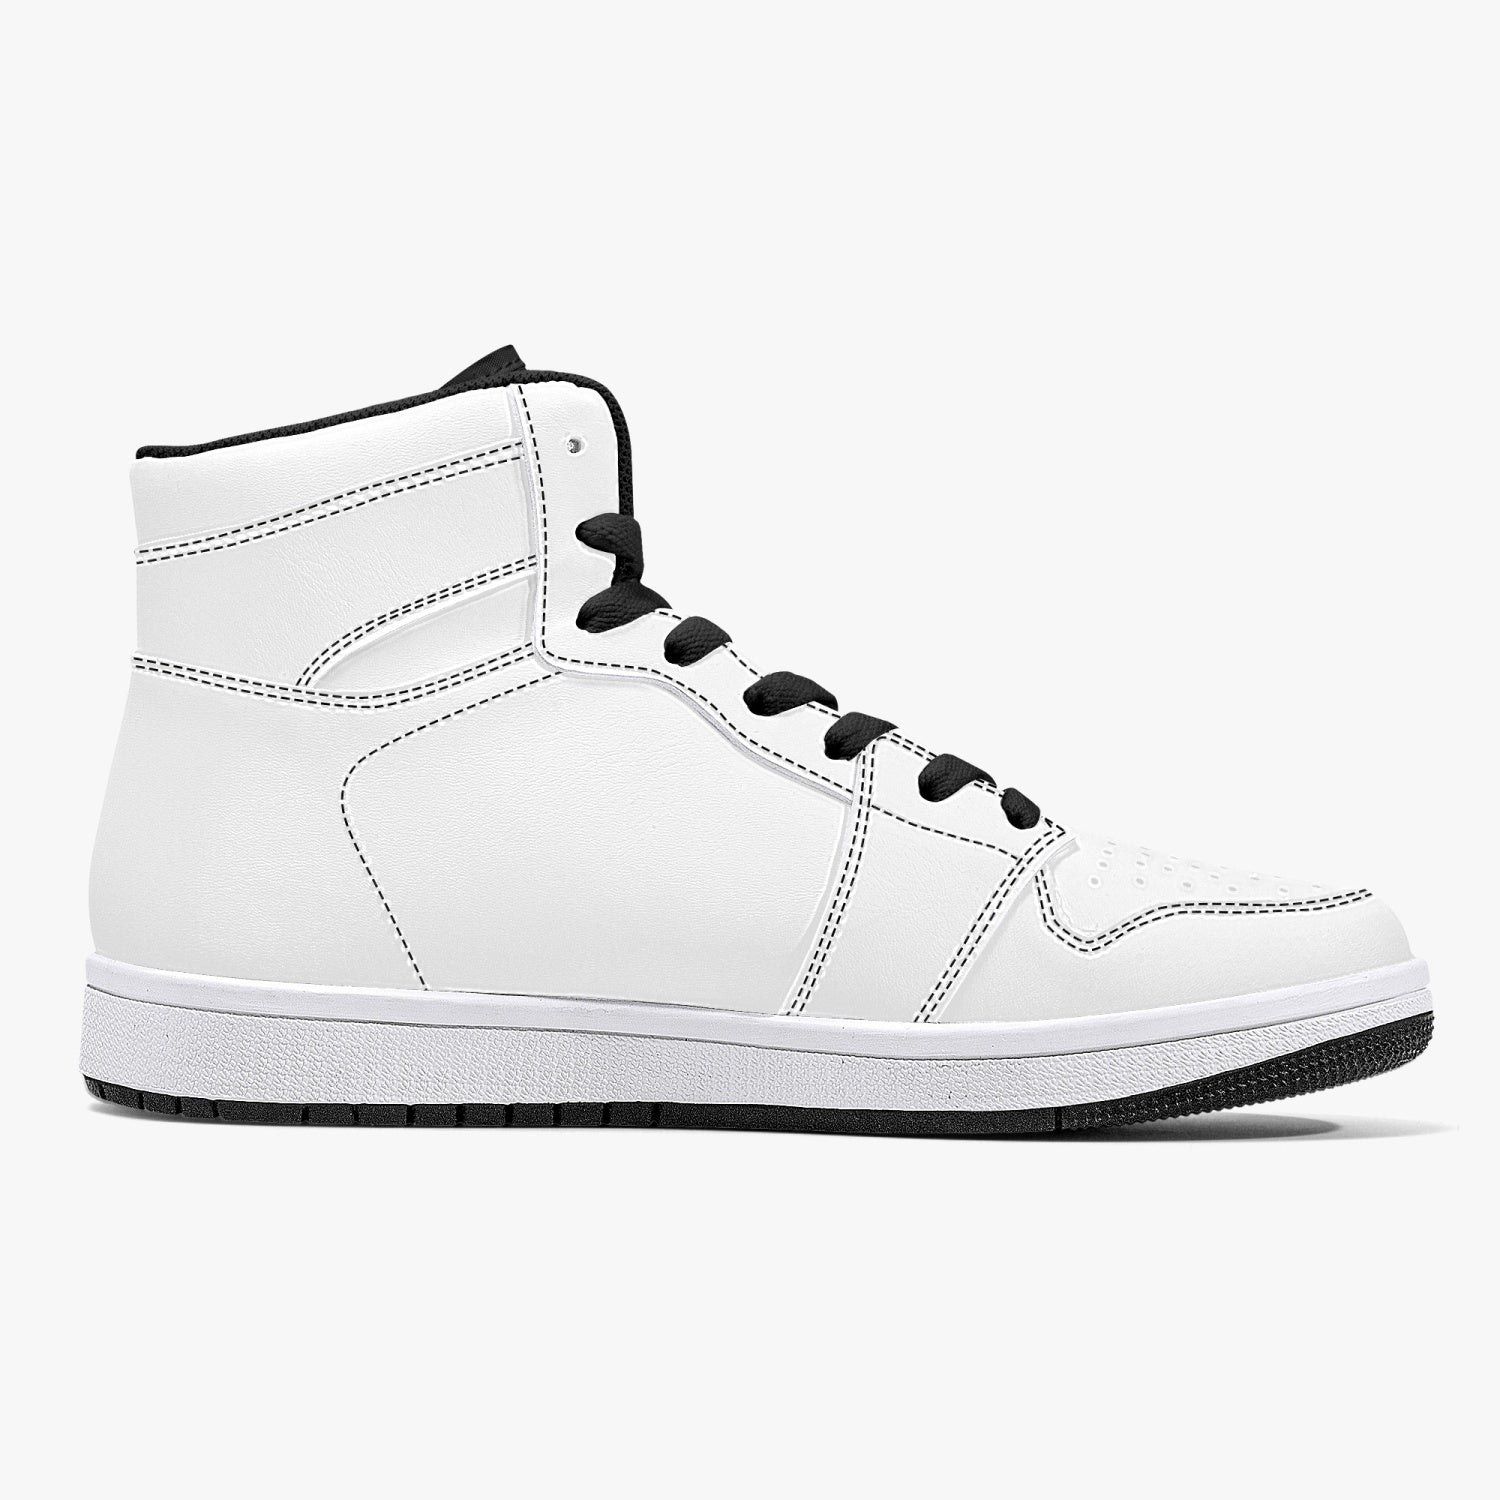 smom High-Top Leather Sneakers - White / Black